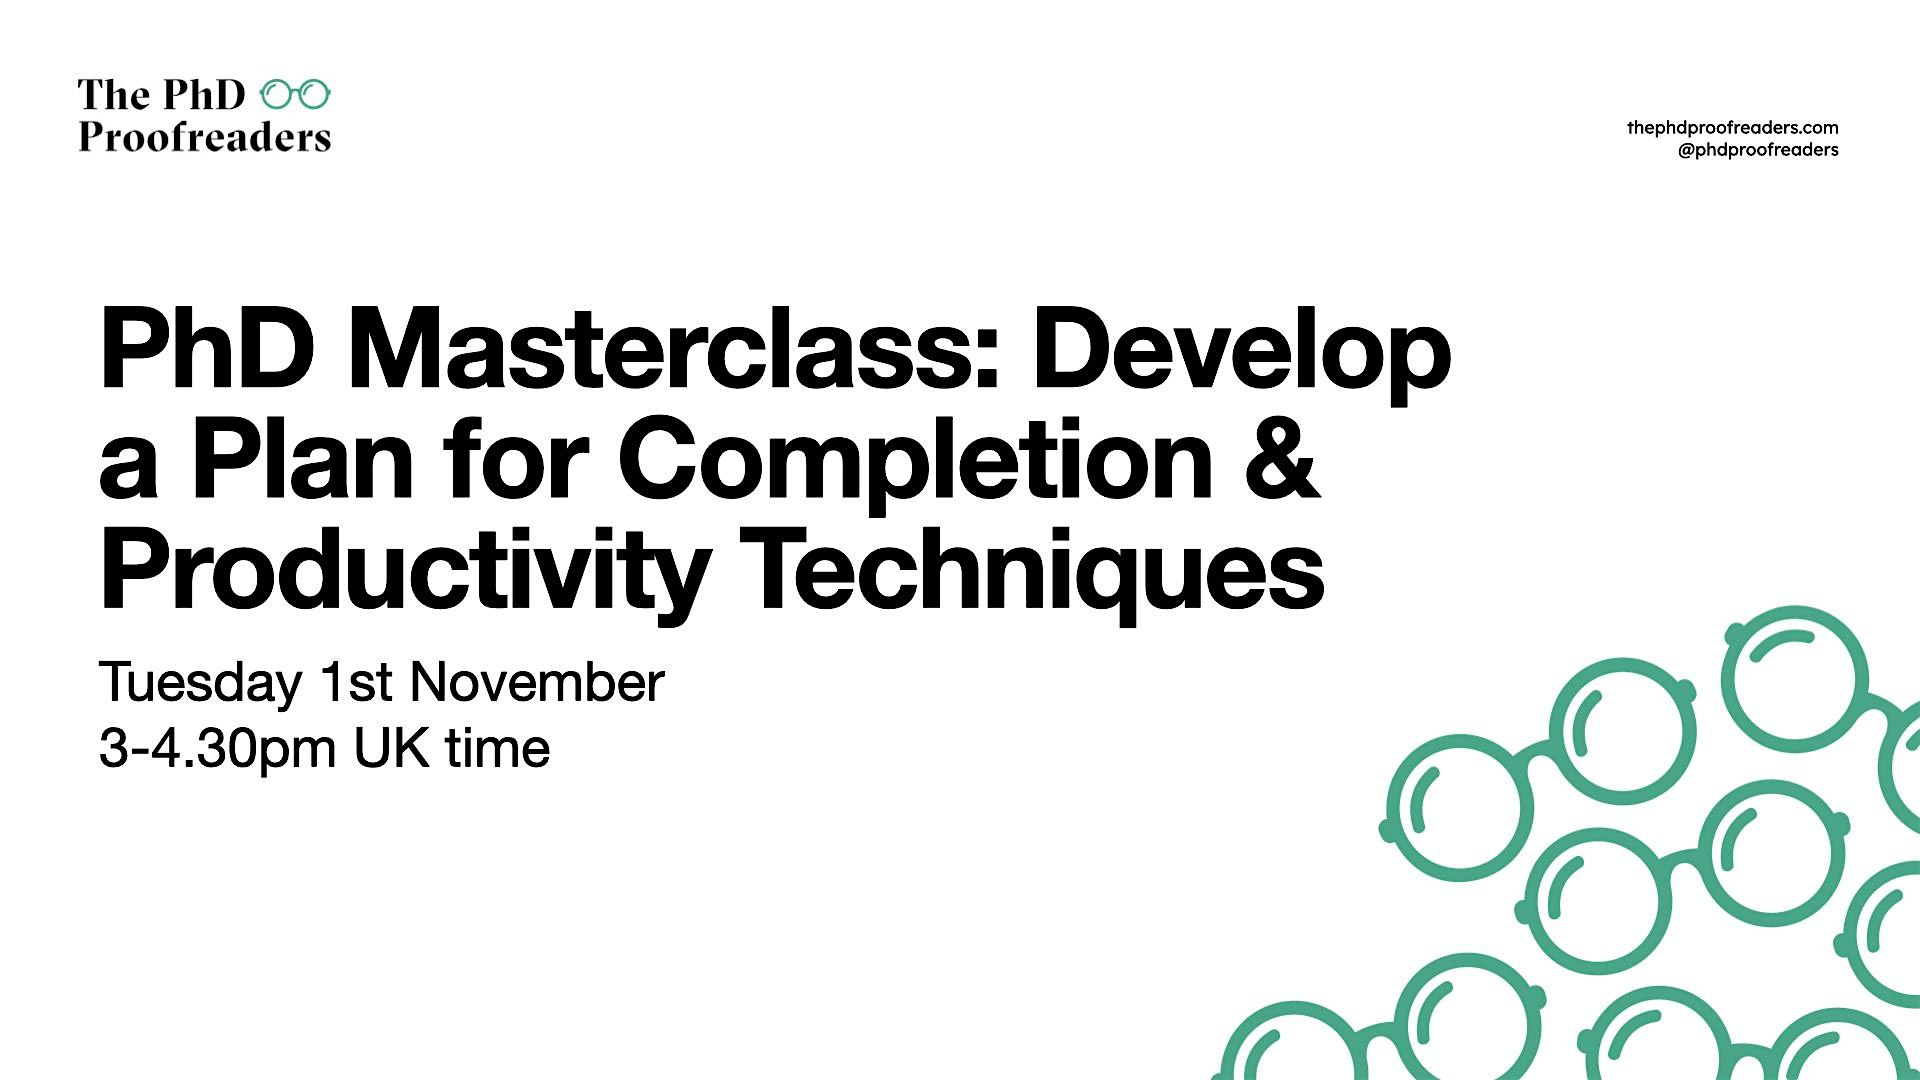 PhD Masterclass: Develop a Plan for Completion & Productivity Techniques